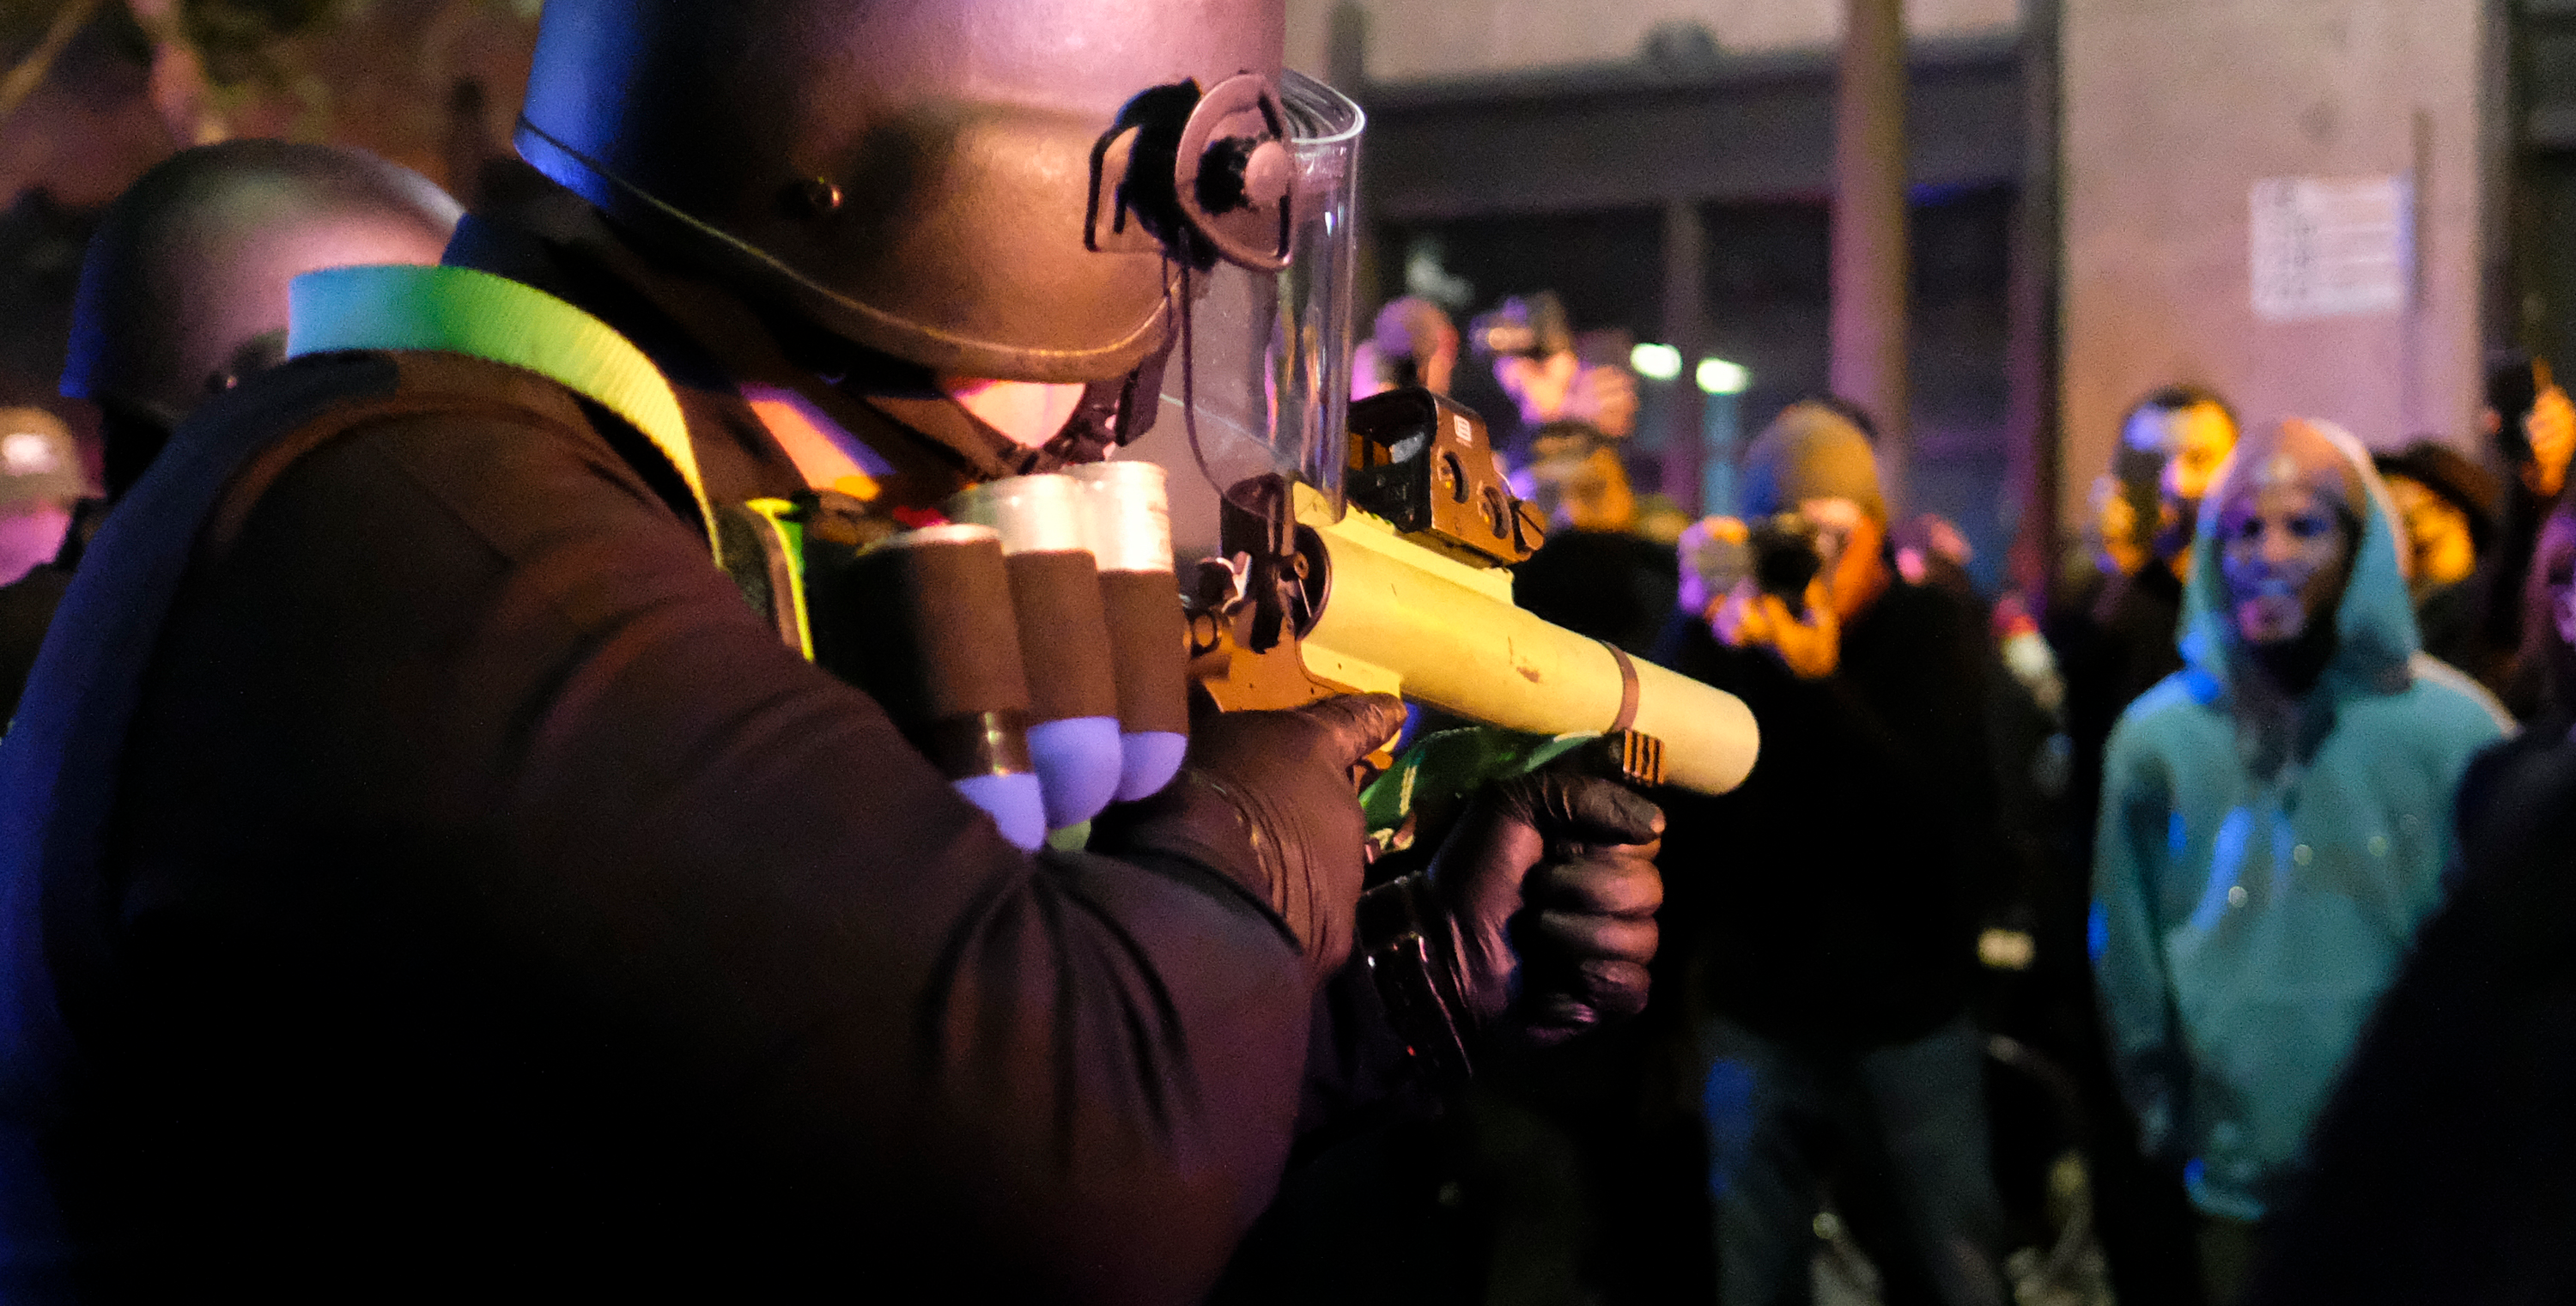 Nonlethal' Anti-Protest Weapons Can Cause Serious Harm